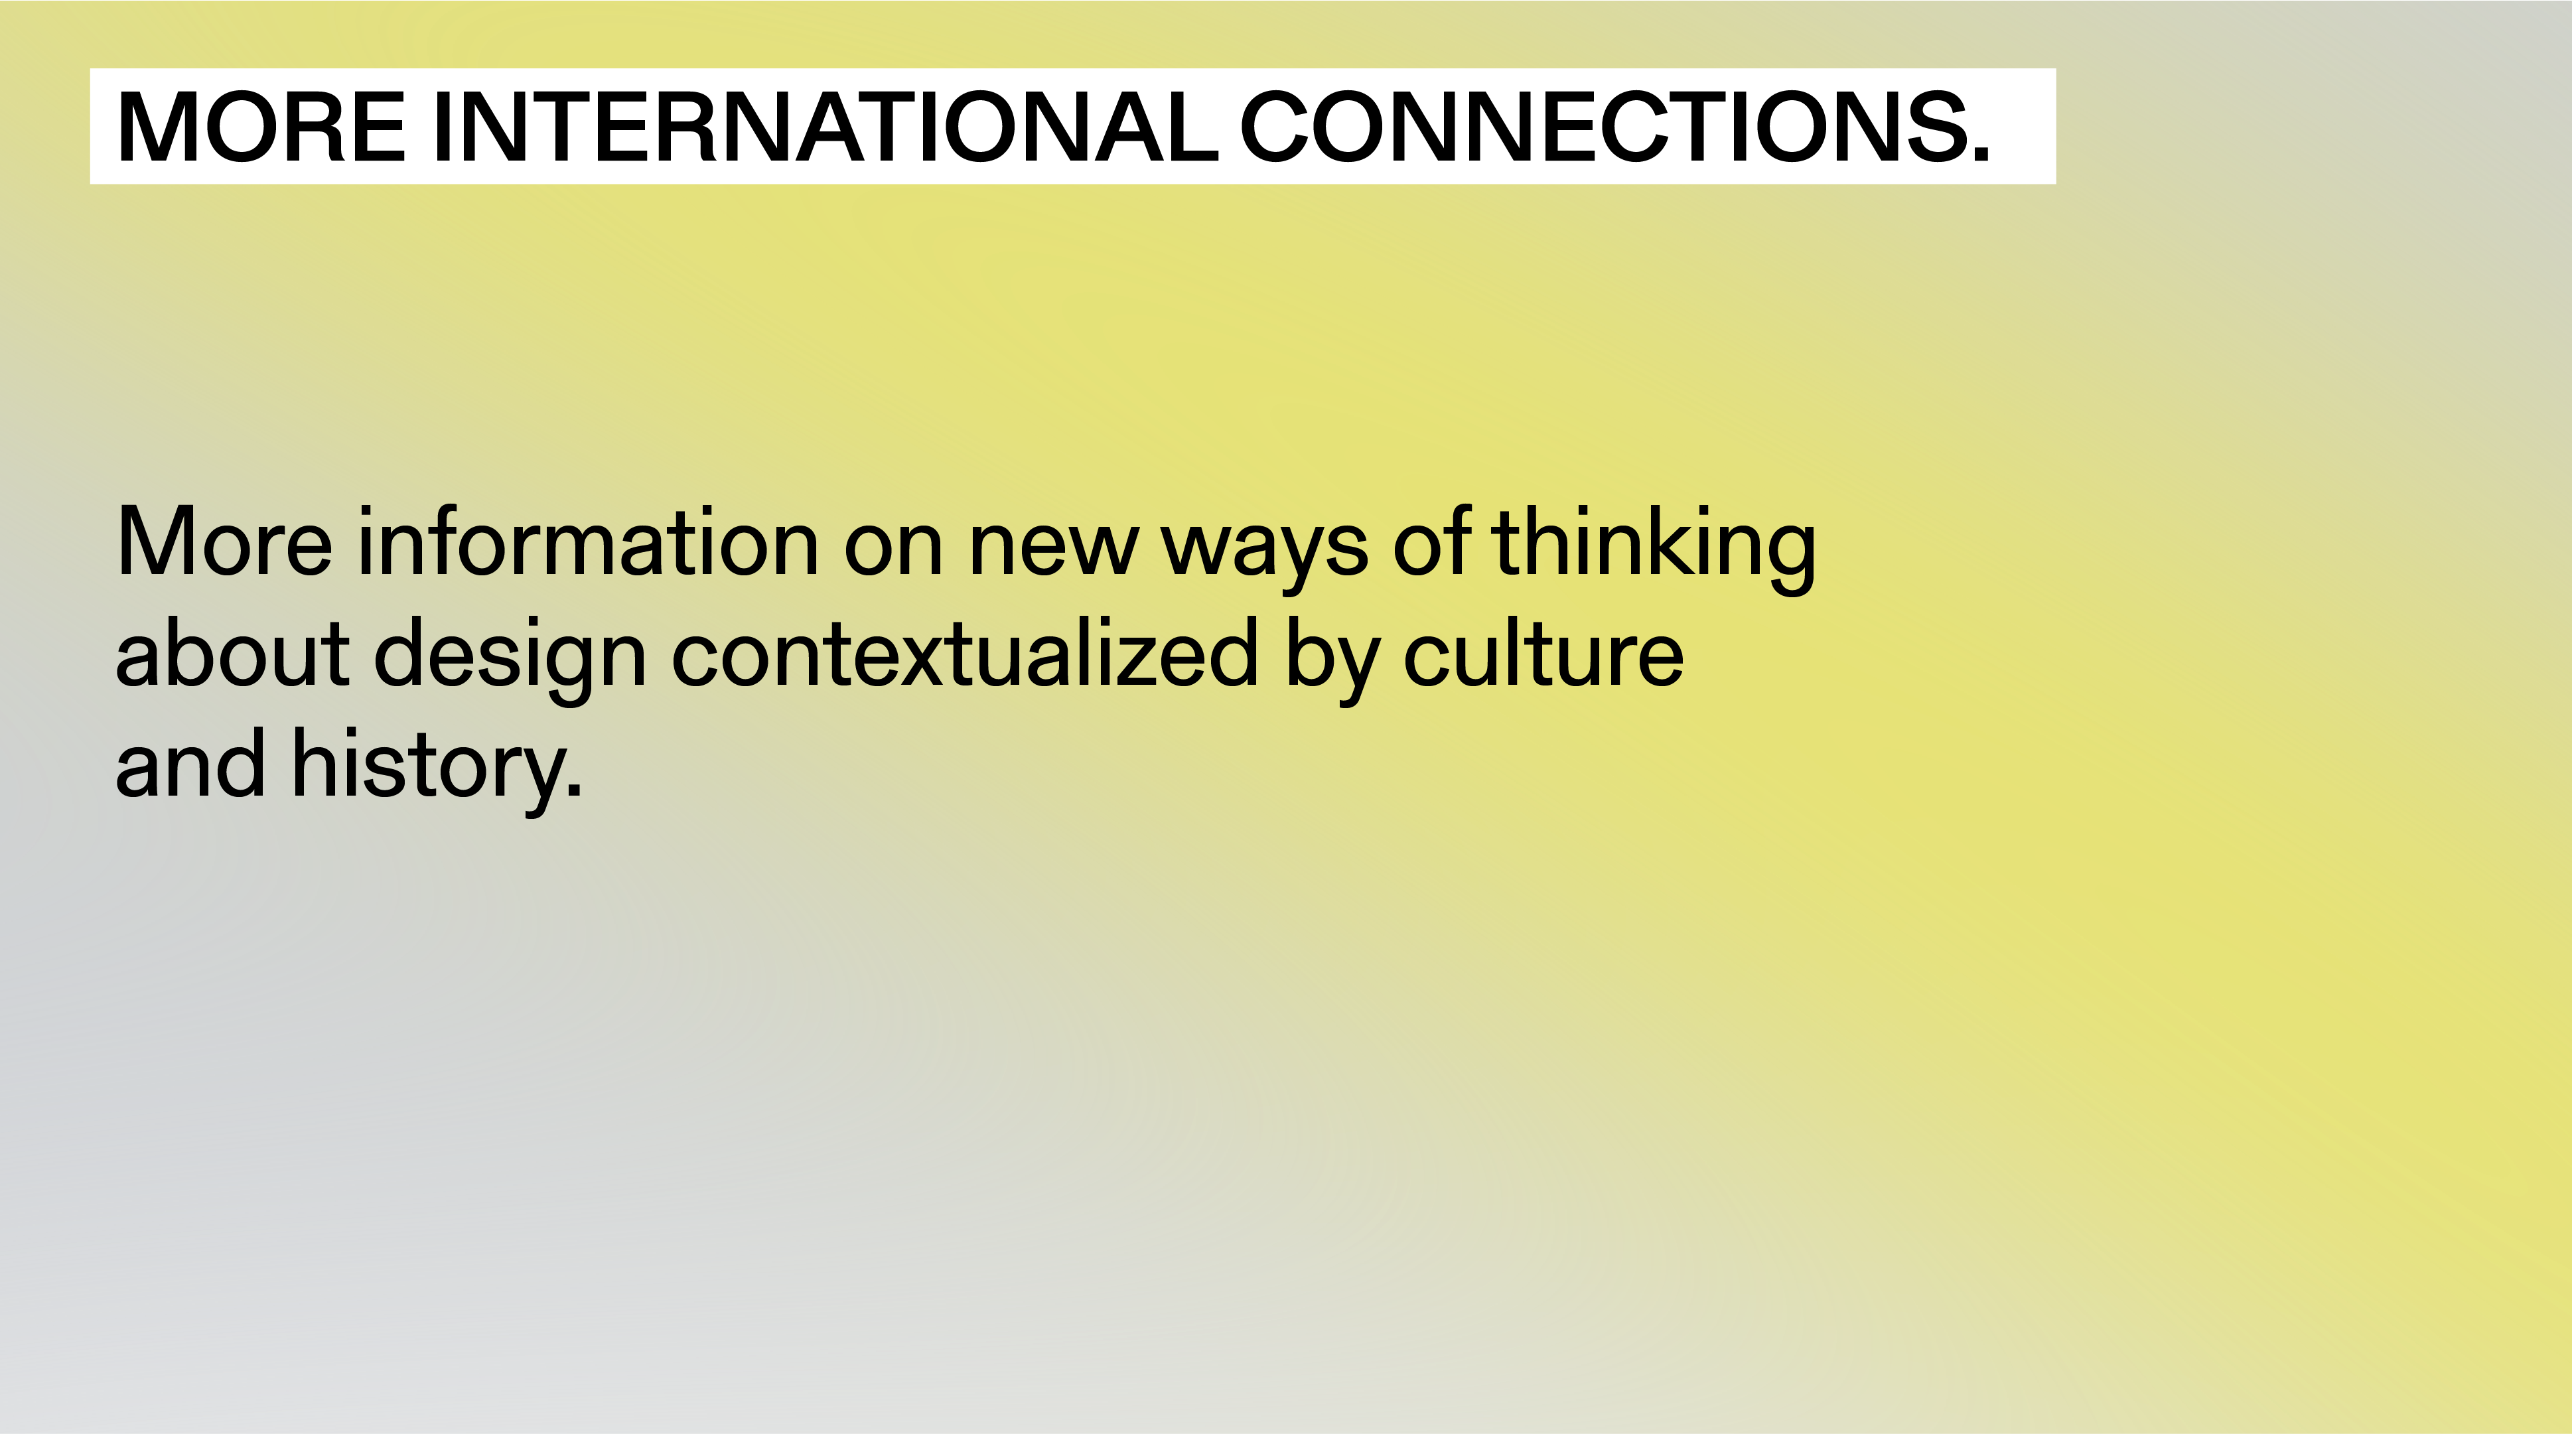 “More international connections. More information on new ways of thinking about design contextualized by culture and history.”